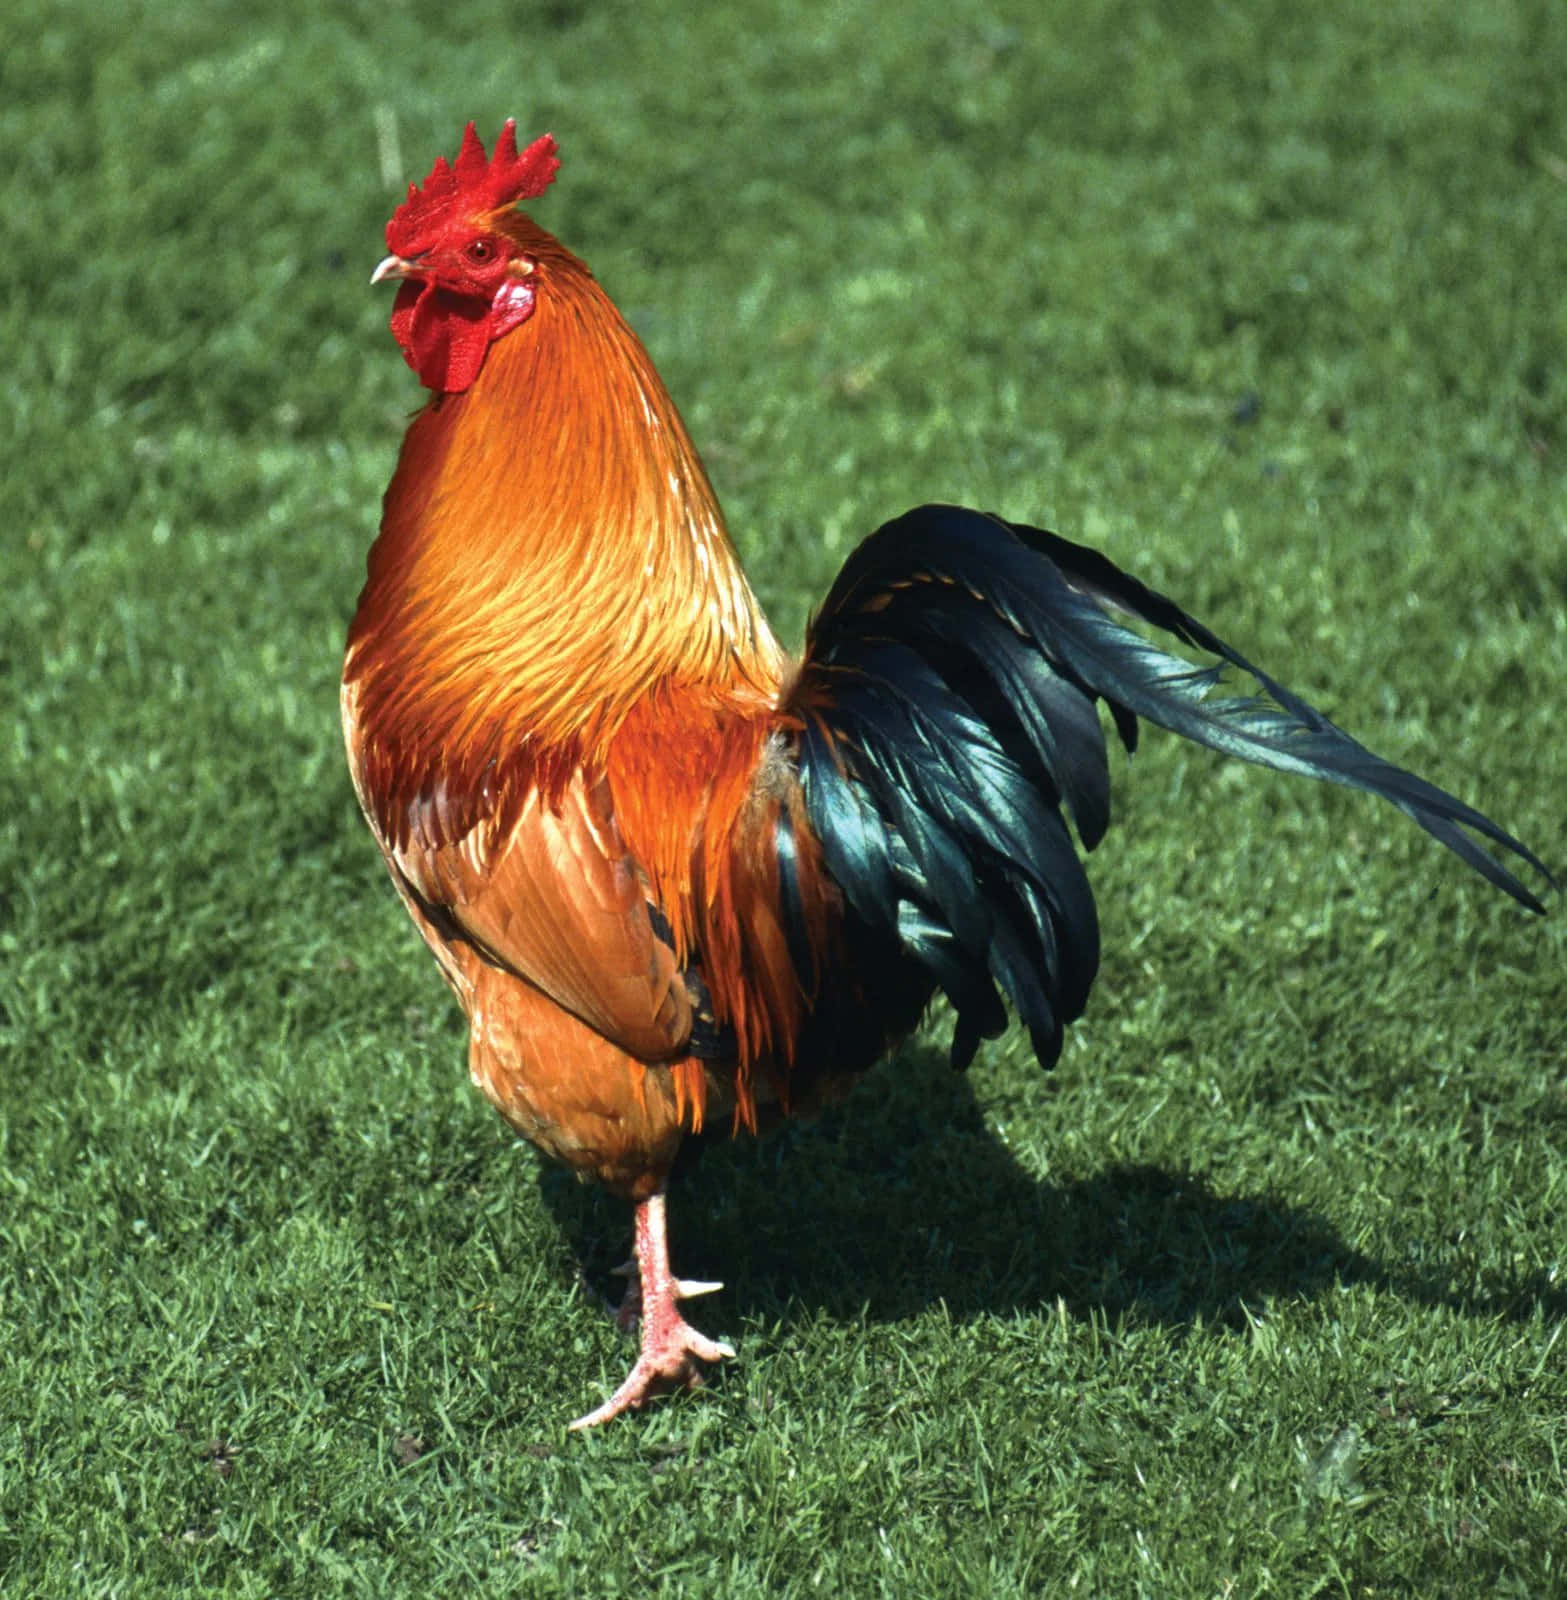 A Rooster Walking On Grass